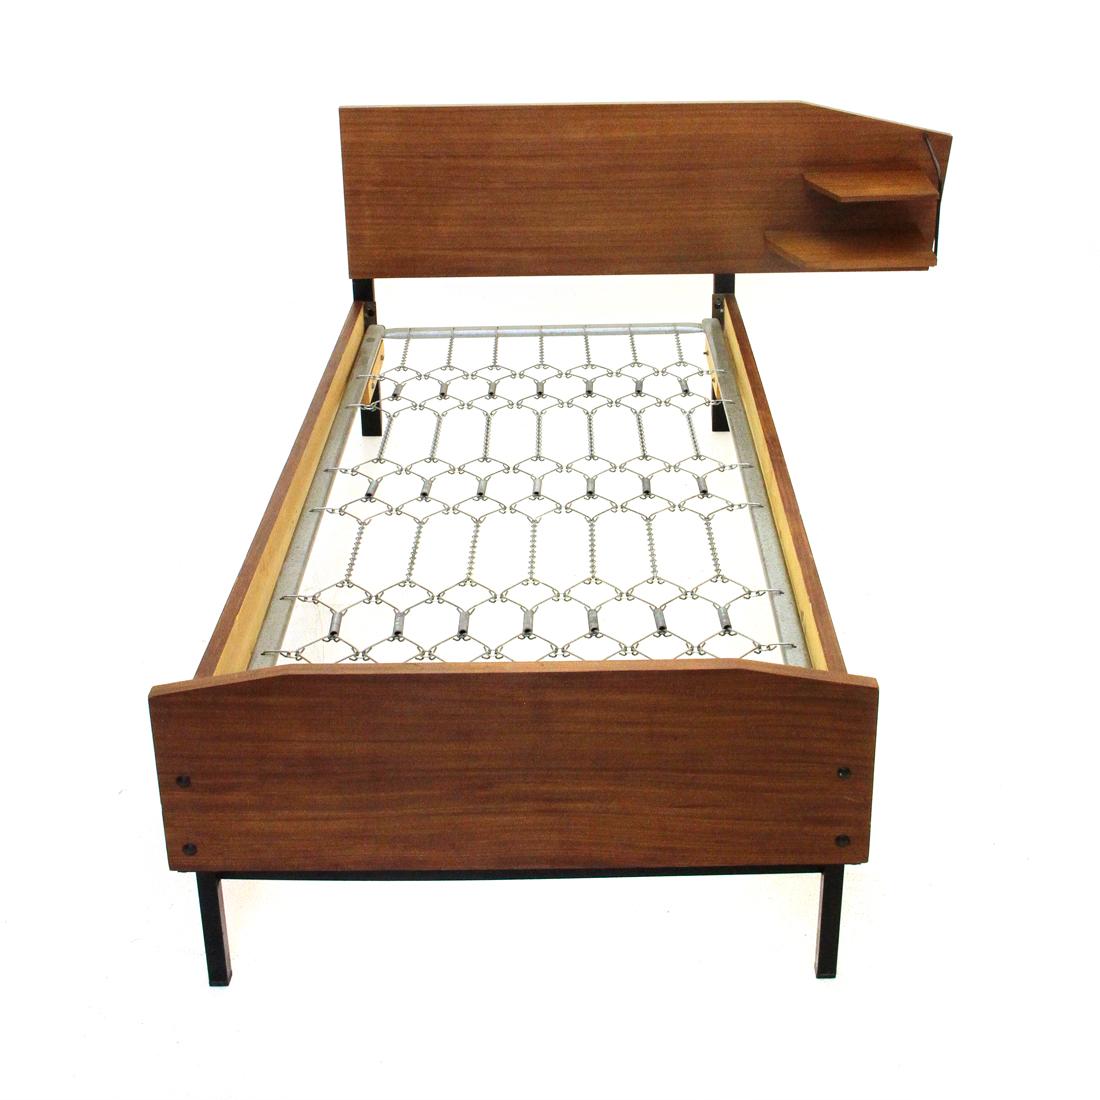 Italian manufacture bed produced in the 1950s.
Teak veneered wood structure.
Legs in black painted metal.
Two side shelves in veneered wood and black painted metal rod.
Metal bed base.
Good general conditions, some signs due to normal use over